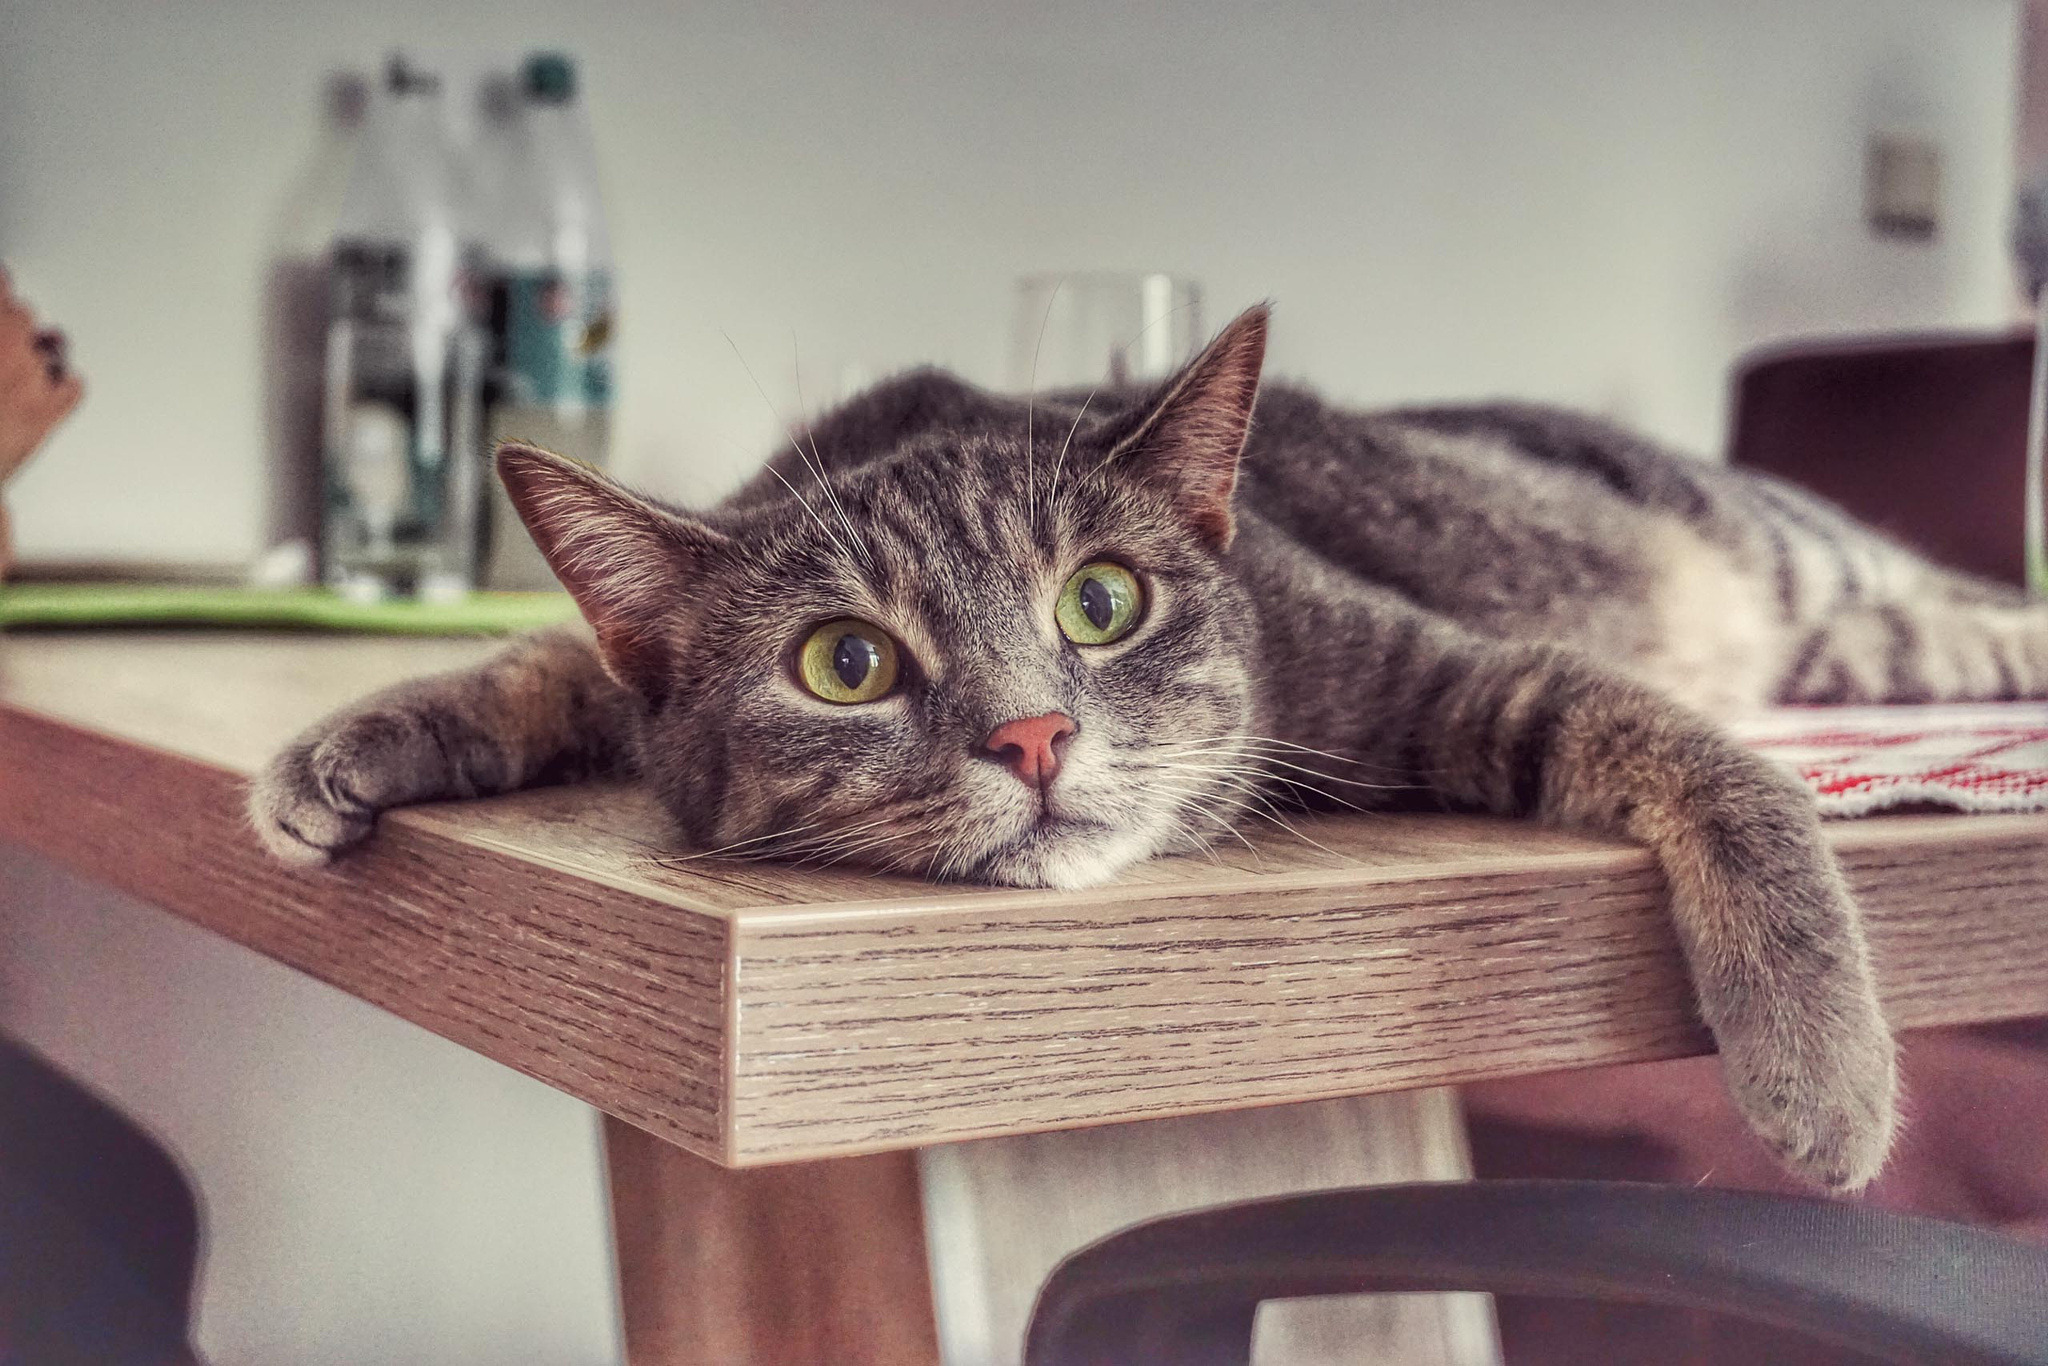 Cat relaxing on a table - Imgur